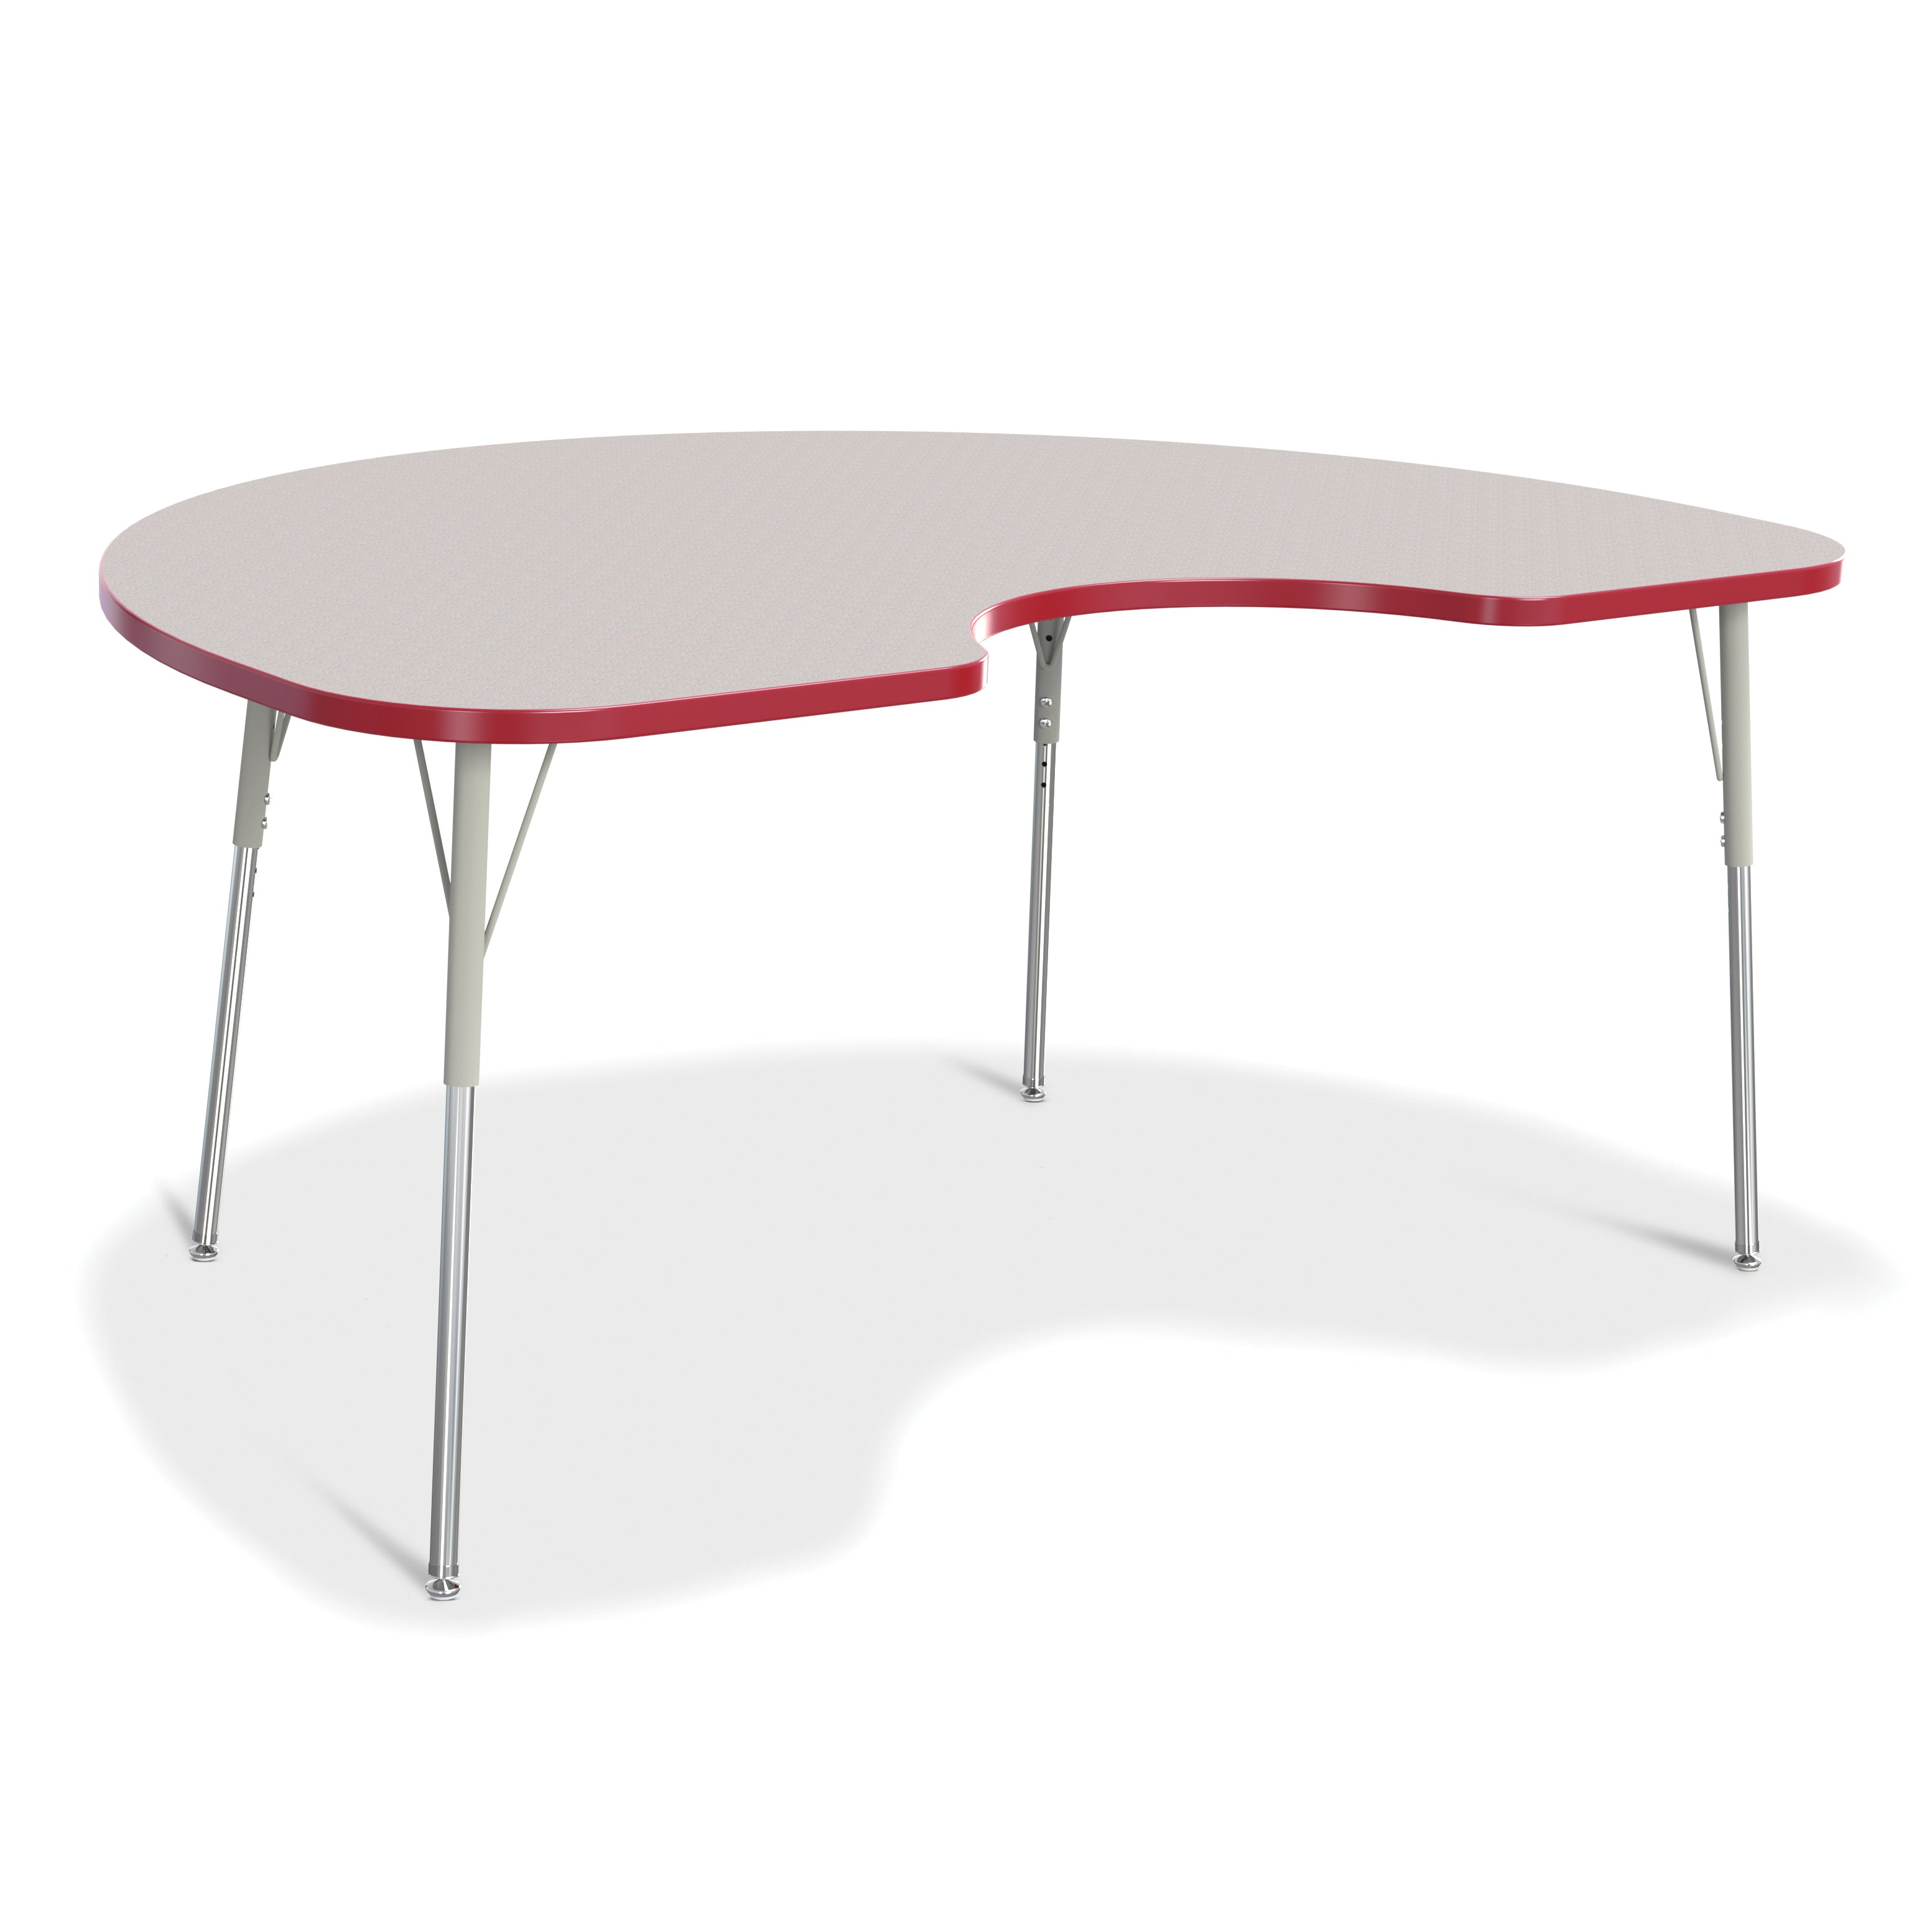 6423JCA008, Berries Kidney Activity Table - 48" X 72", A-height - Freckled Gray/Red/Gray